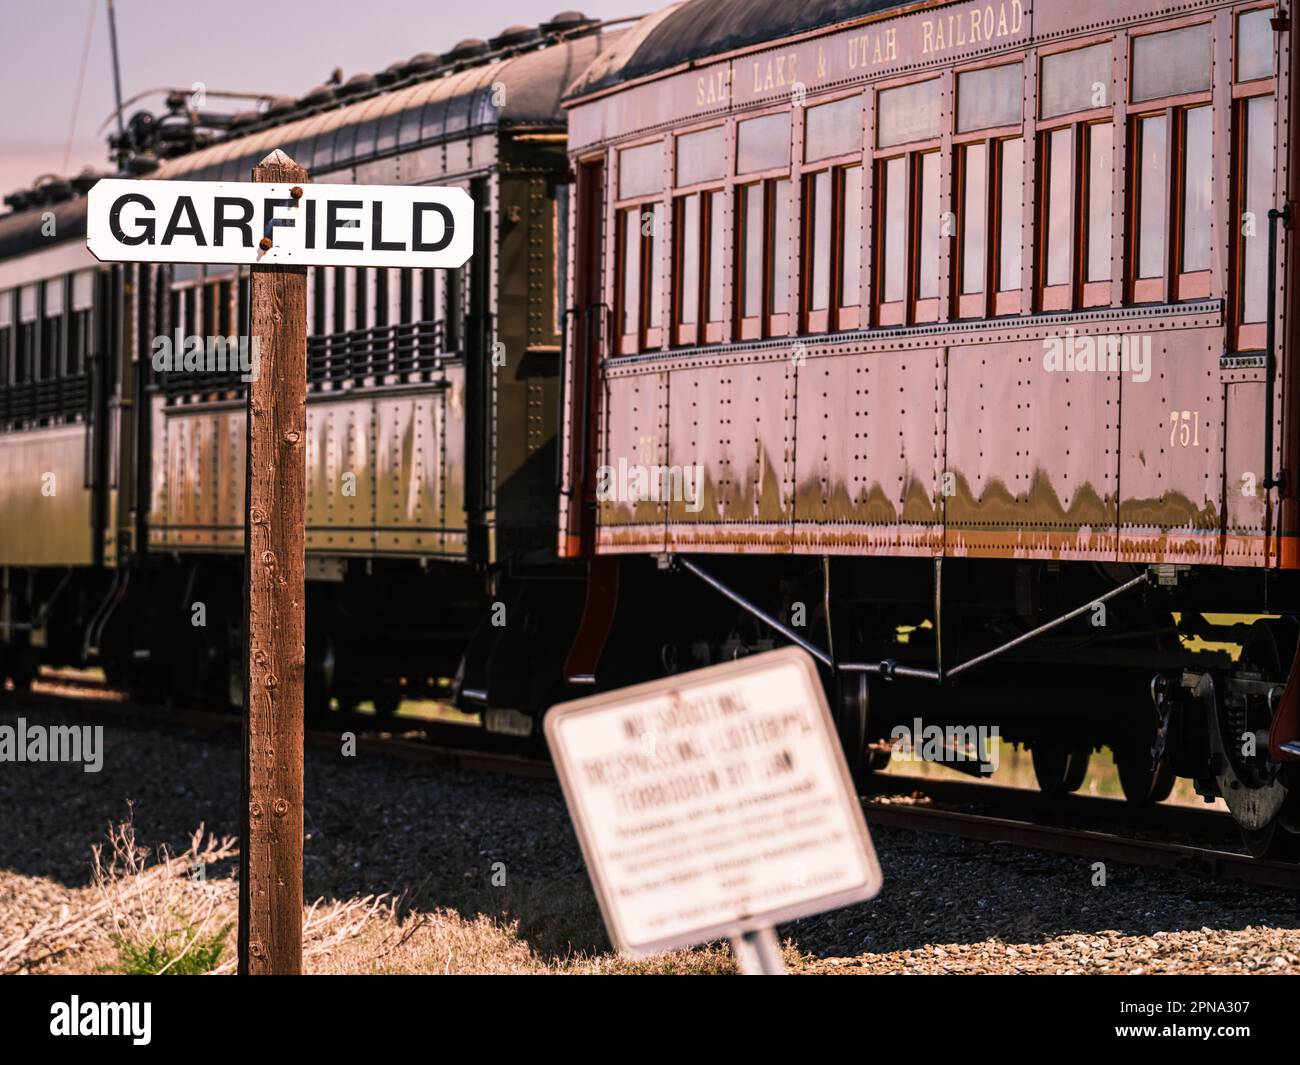 A historical railroad signage post of Garfield and a vintage passing train, California Stock Photo